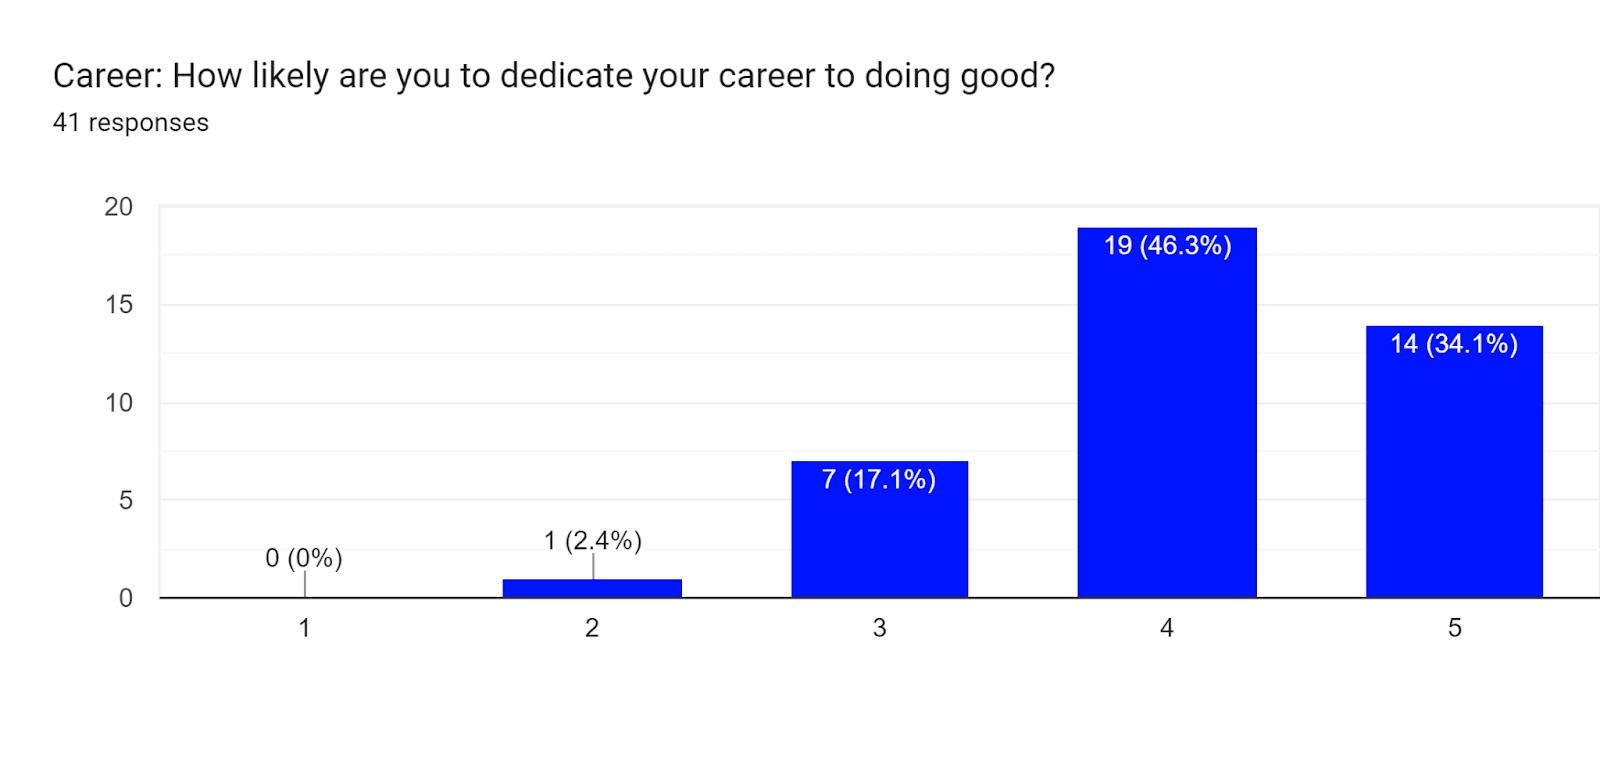 Forms response chart. Question title: Career: How likely are you to dedicate your career to doing good?
. Number of responses: 41 responses.